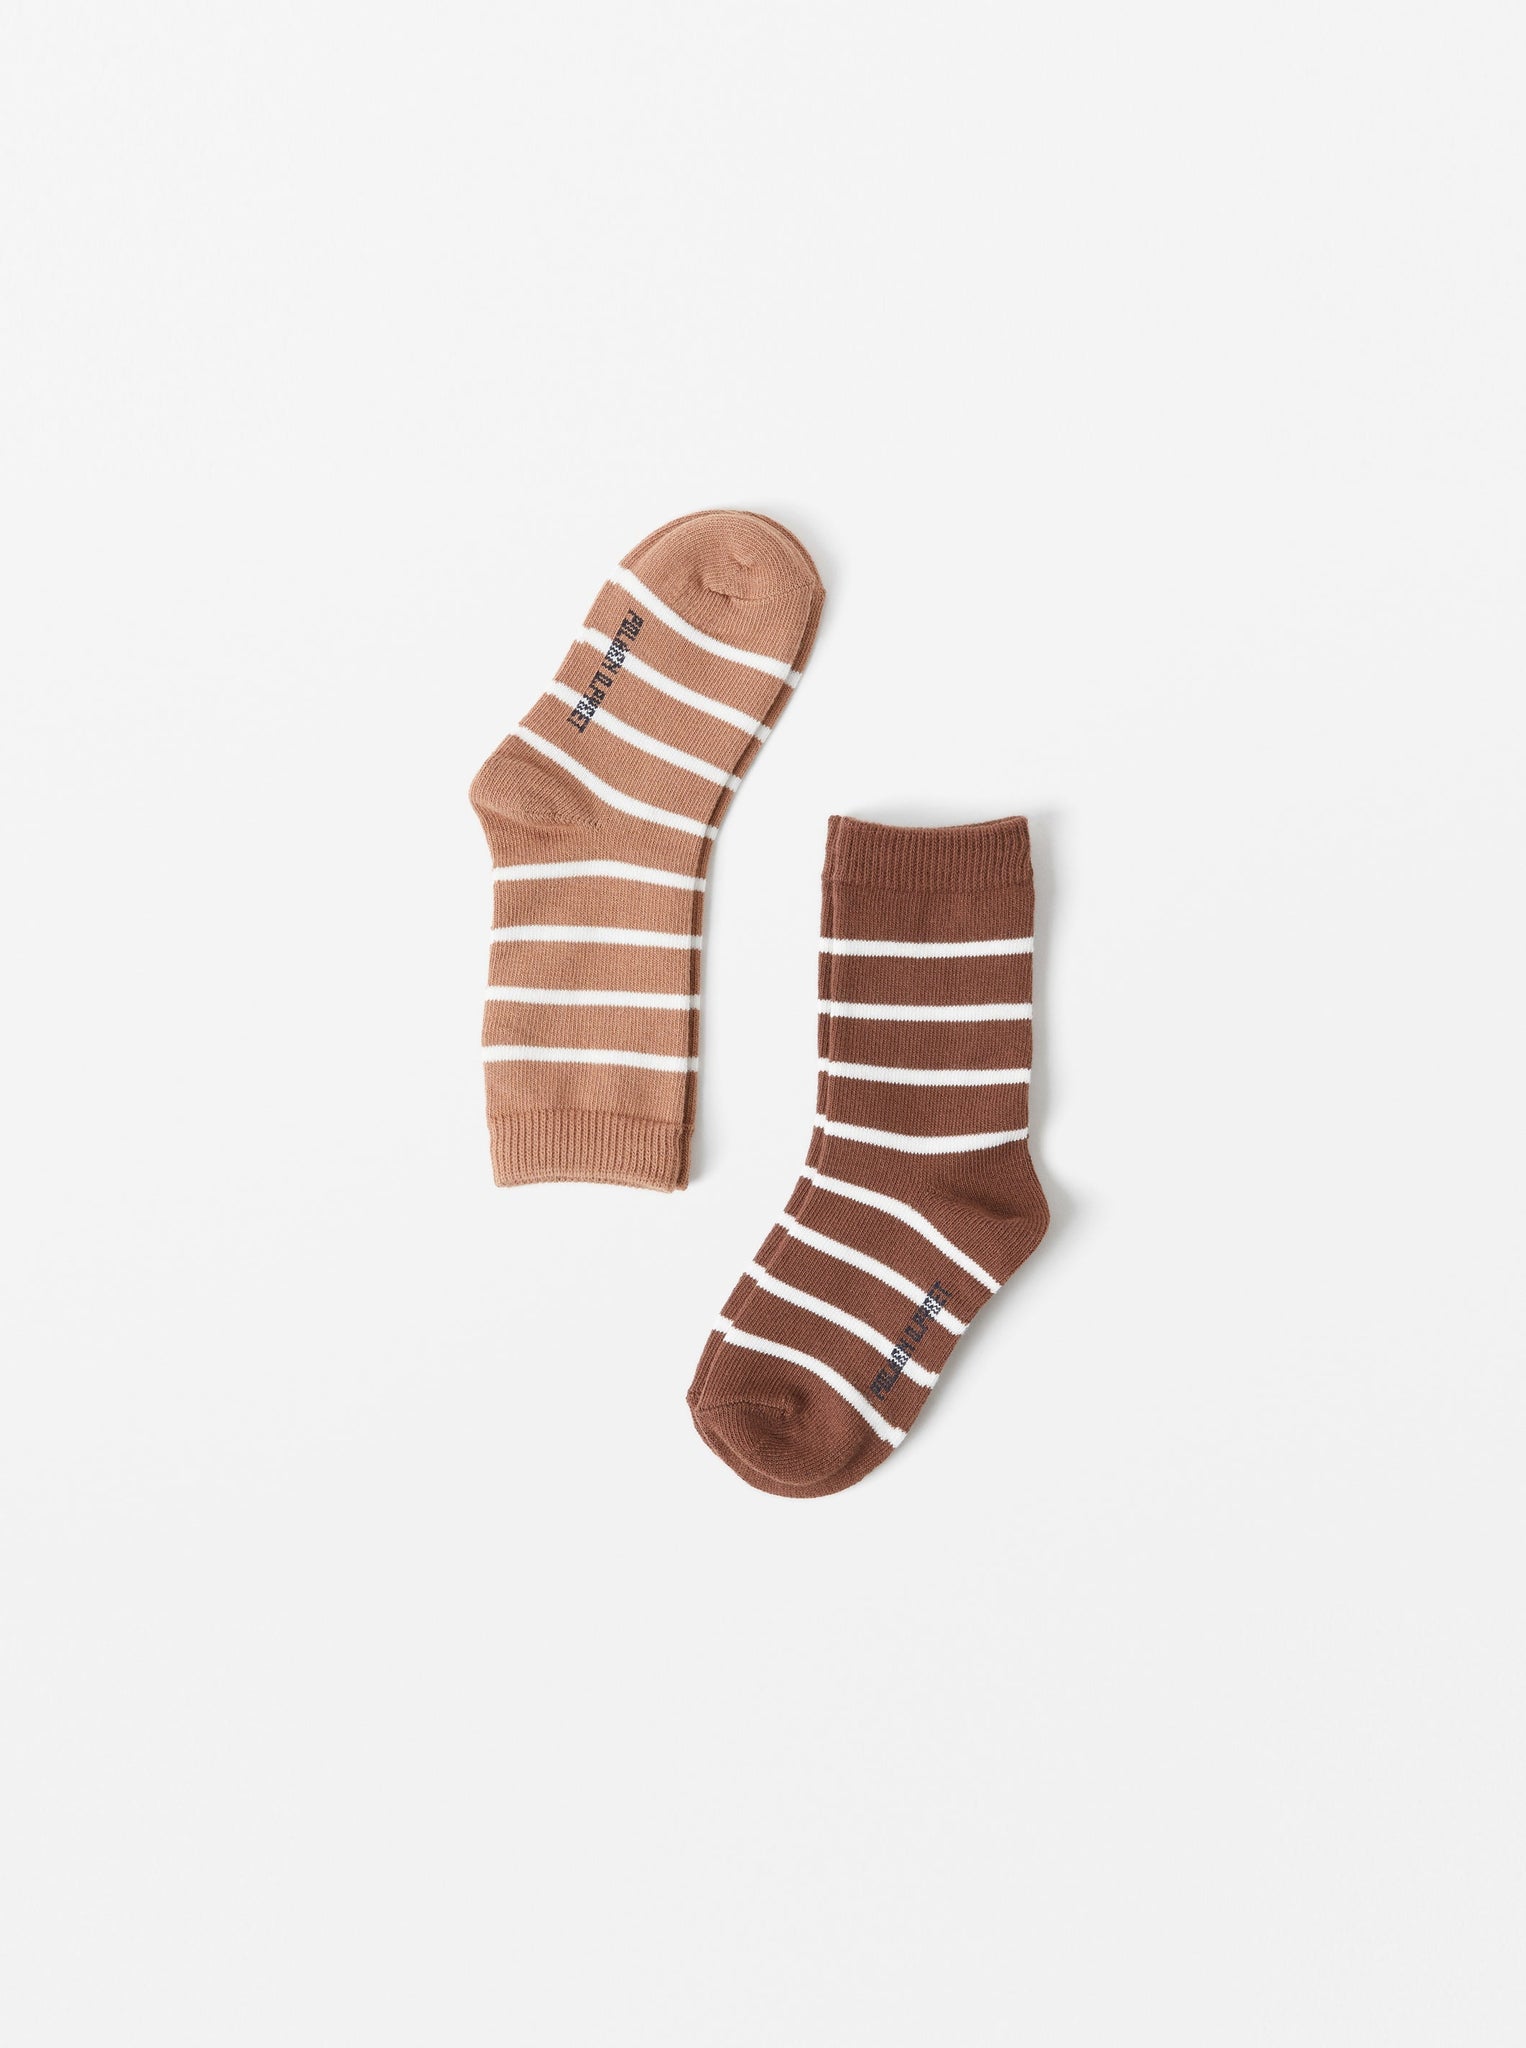 Brown Kids Socks Multipack from the Polarn O. Pyret Kidswear collection. Ethically produced kids clothing.